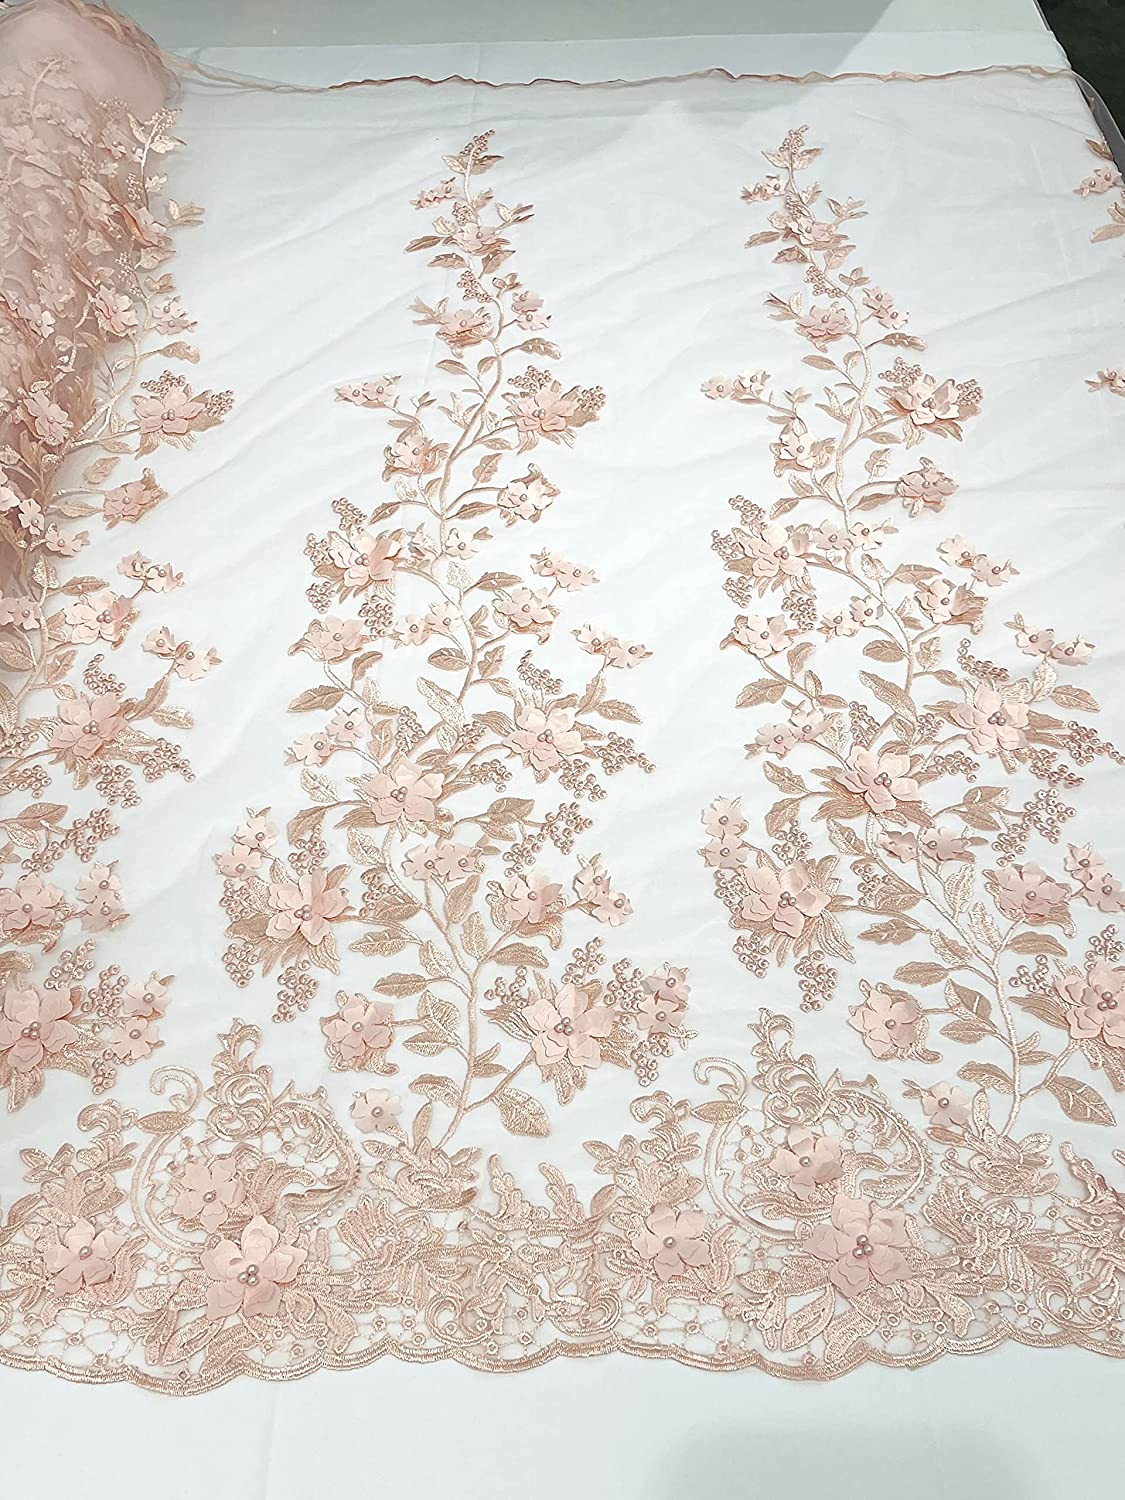 Emily 3-D Floral Design Embroider with Pearls On A Mesh Lace Fabric (1 Yard, Blush Pink)